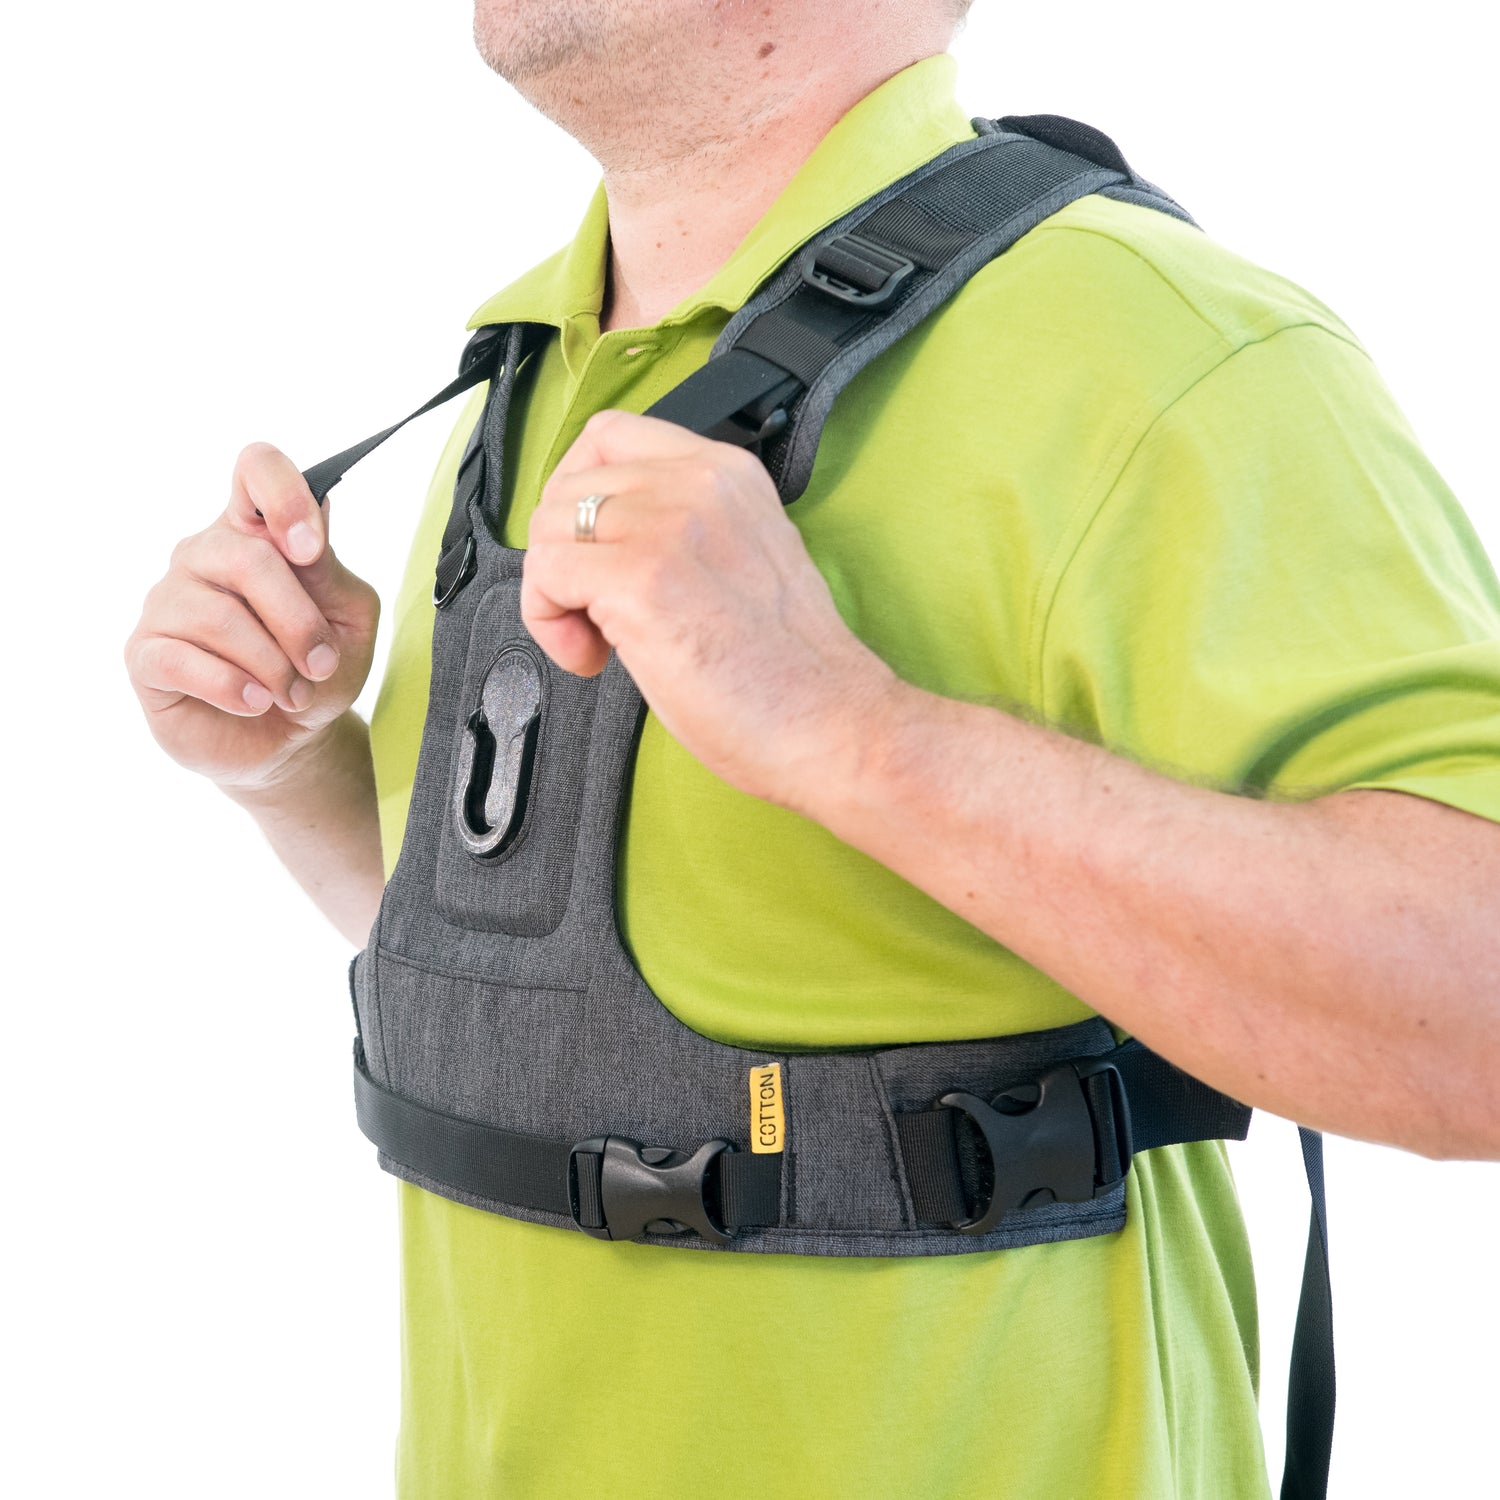 Man demonstrating how to tighten the straps on a G3 camera harness